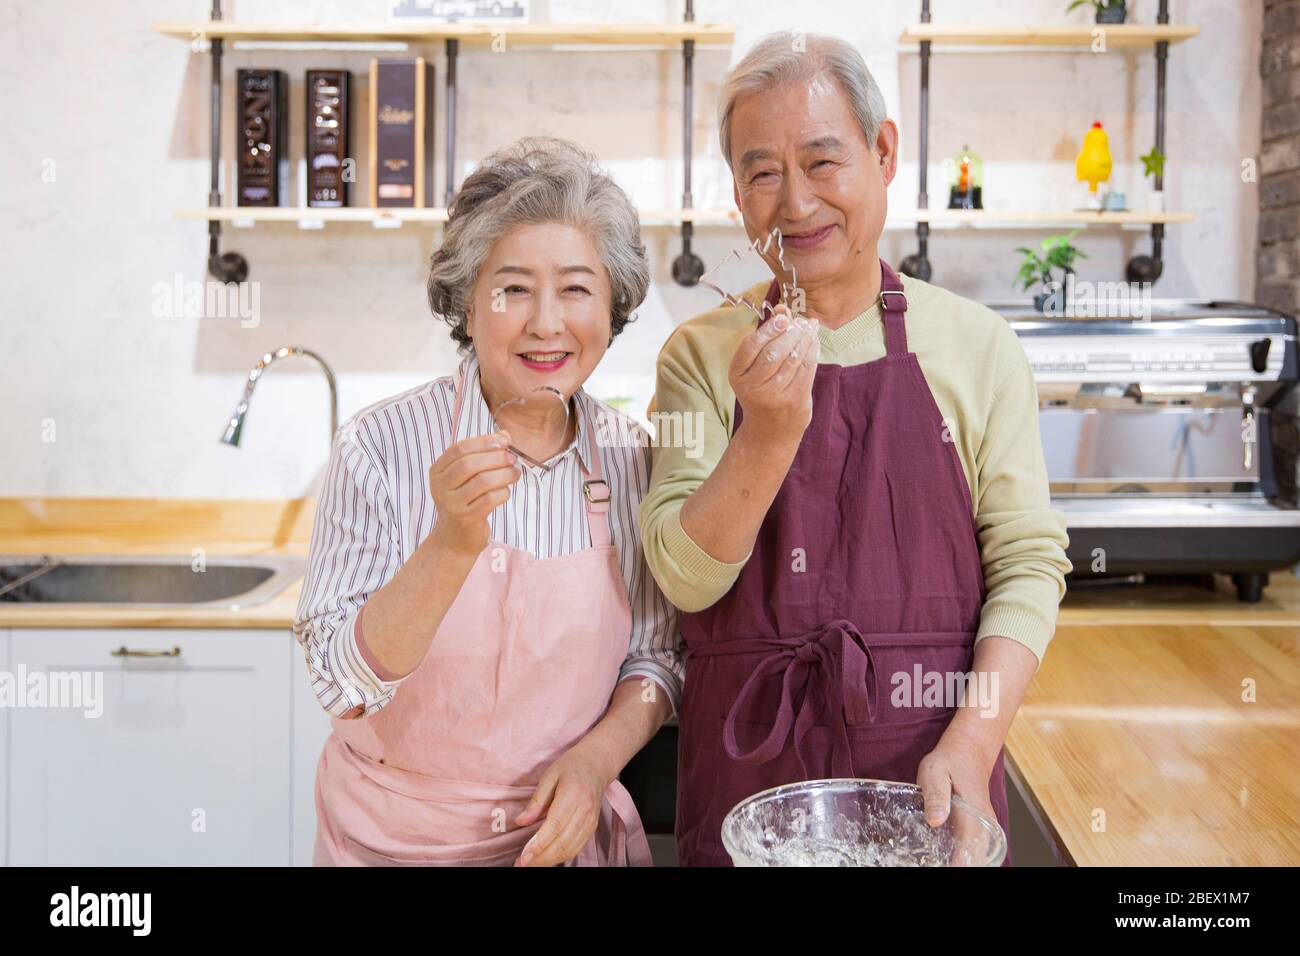 Happy senior life concept. Healthy activities in daily life of senior couple 269 Stock Photo